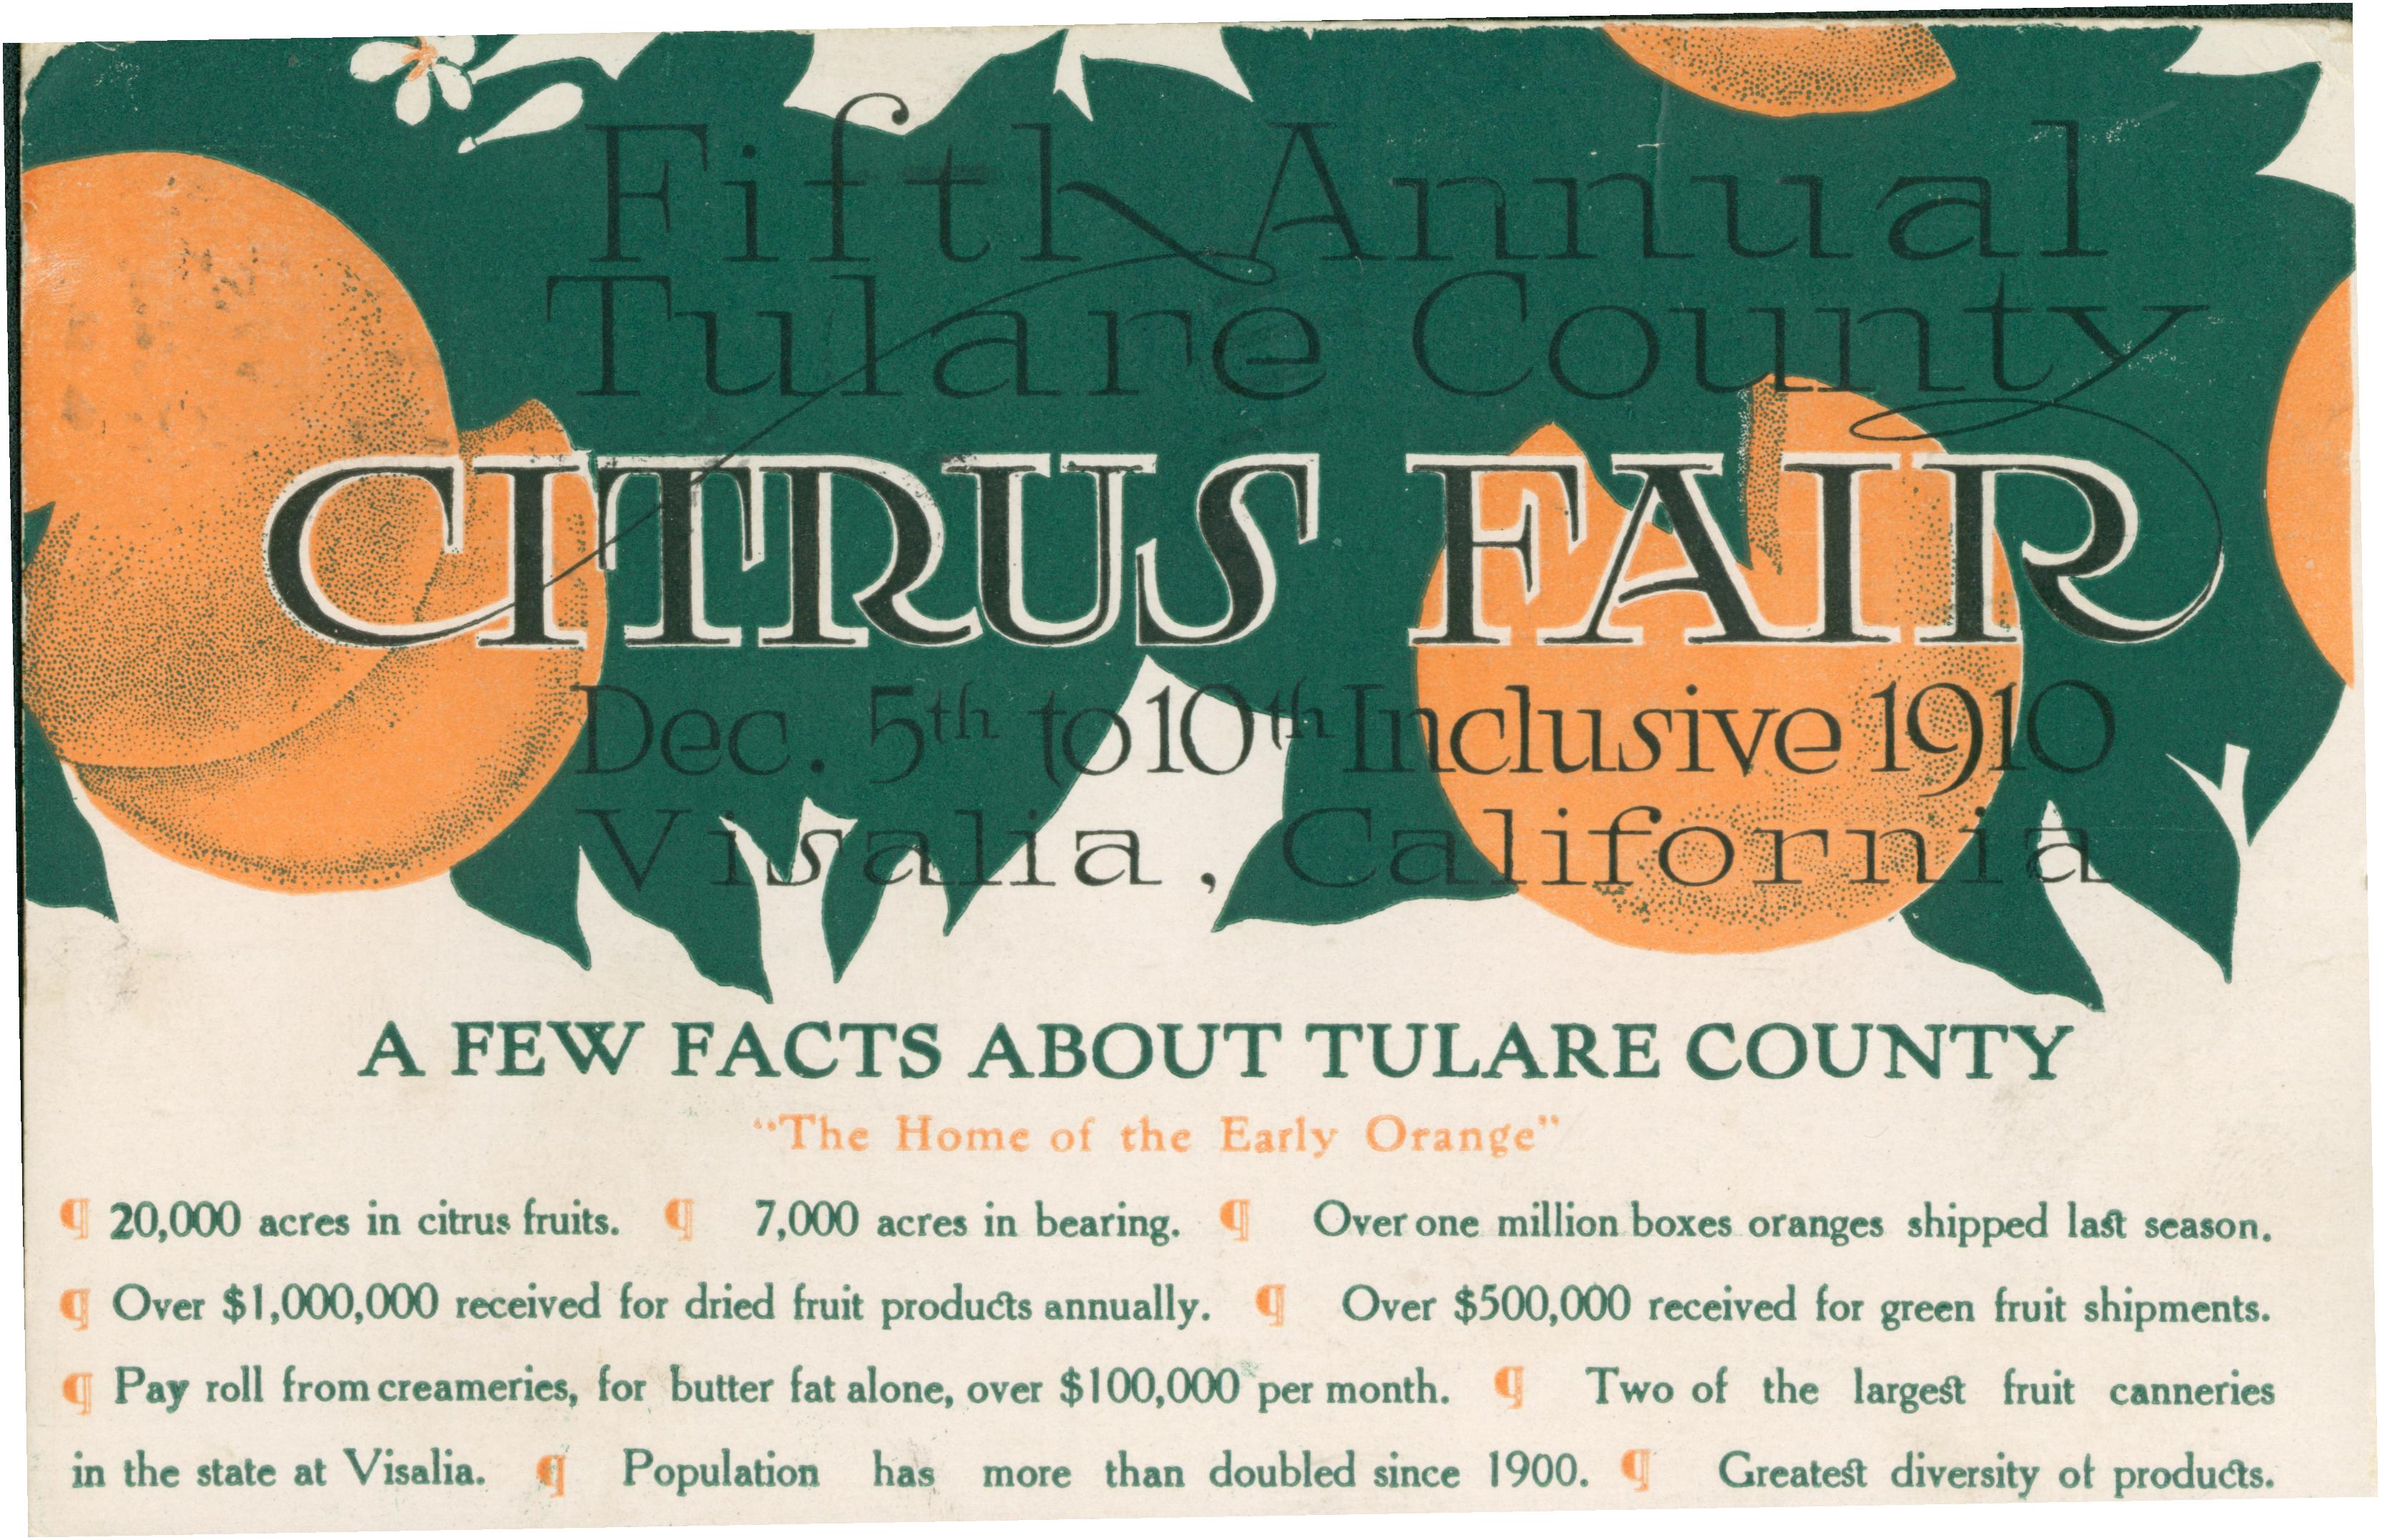 Shows fair information with graphics of oranges in the background